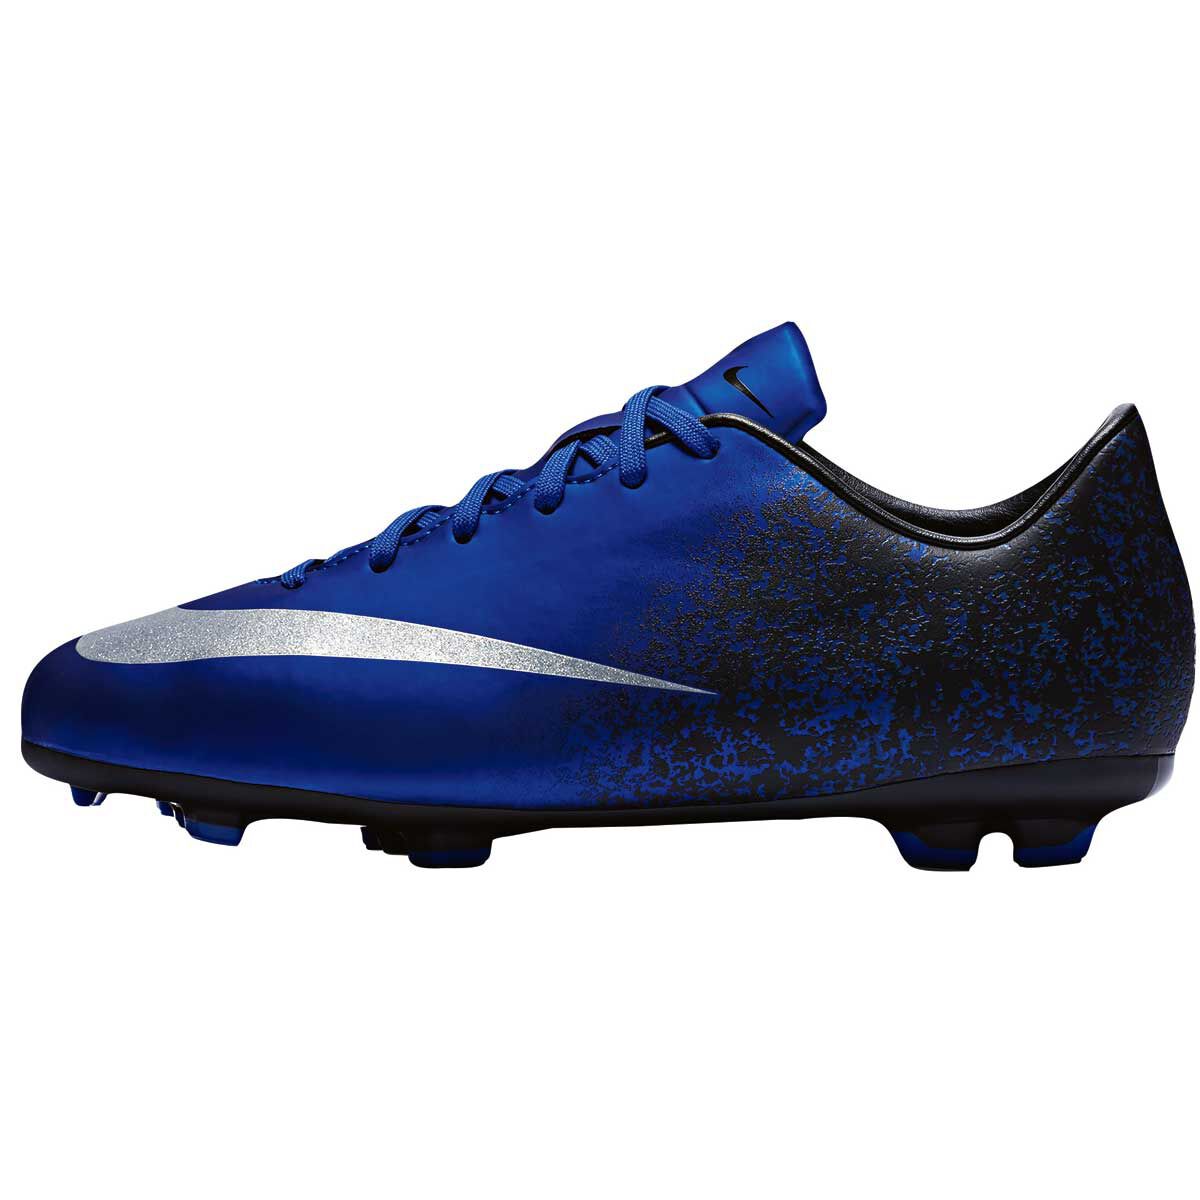 Nike cr7 indoor shoes sale up to 30% discounts radio aktiv